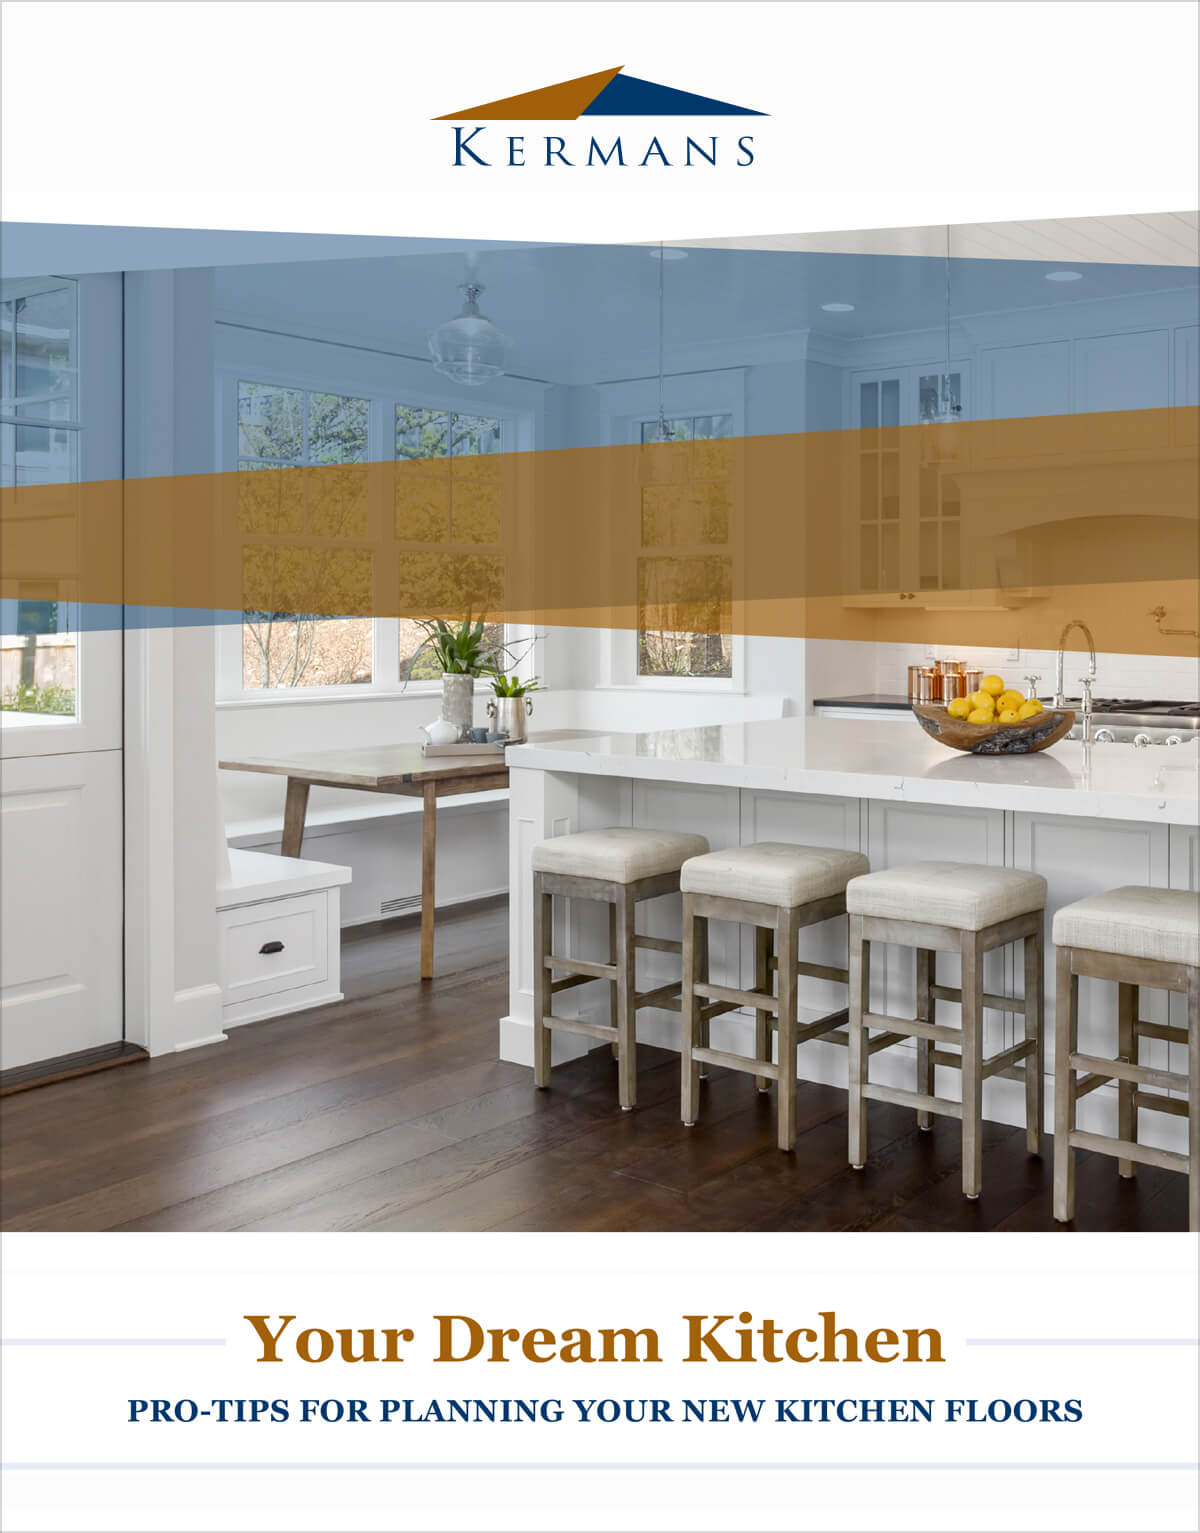 The cover of Kermans' dream kitchen flooring guide